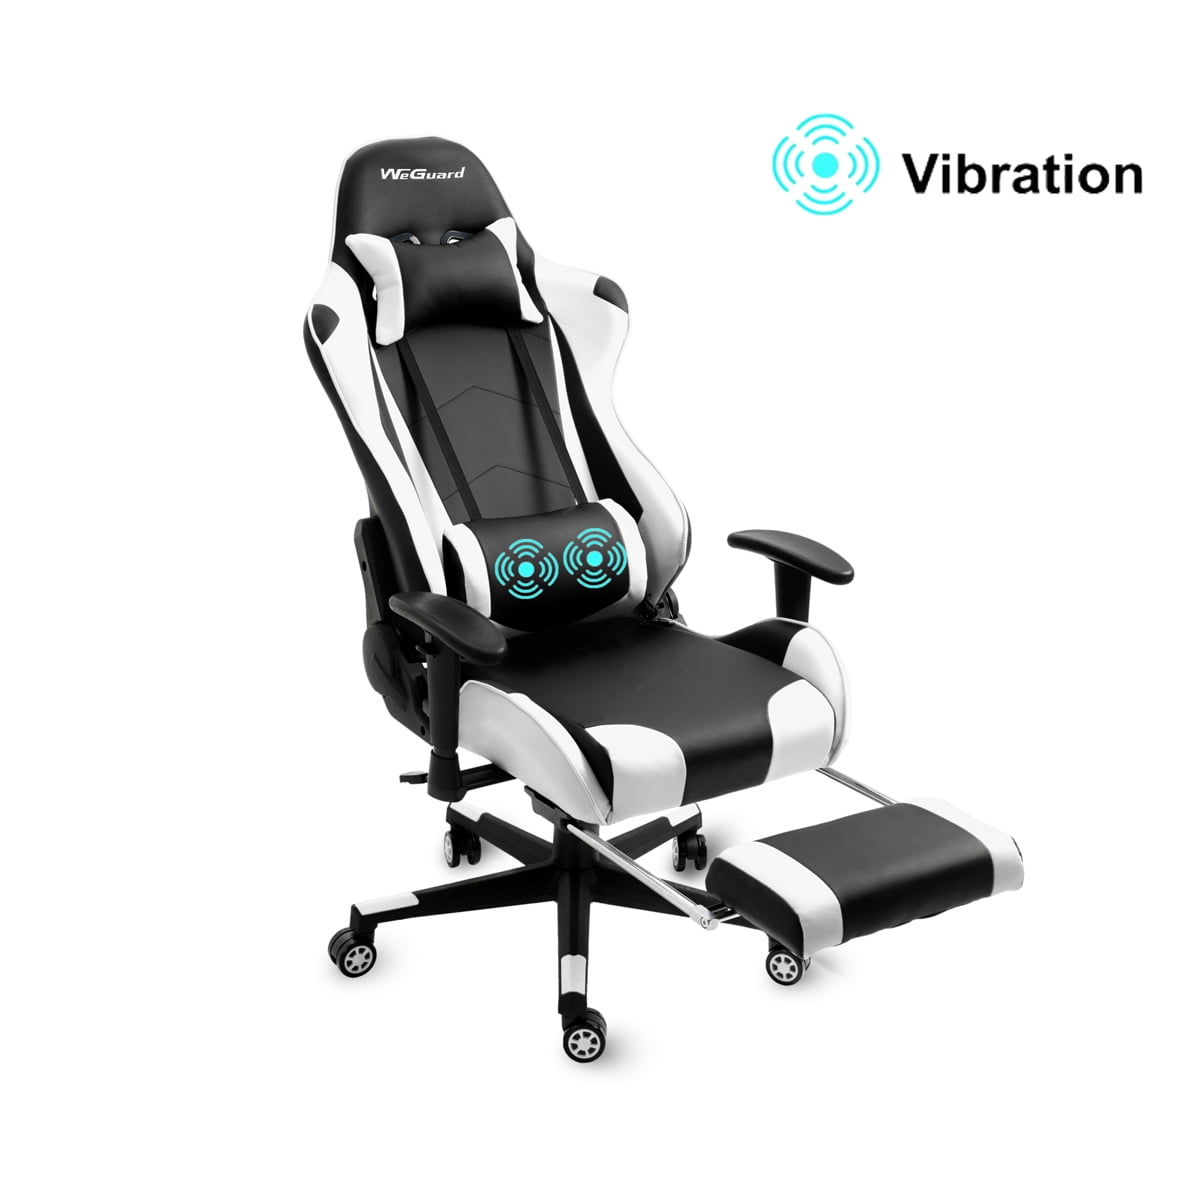 White Office Chair High back Computer Racing Gaming Chair Ergonomic Chair 